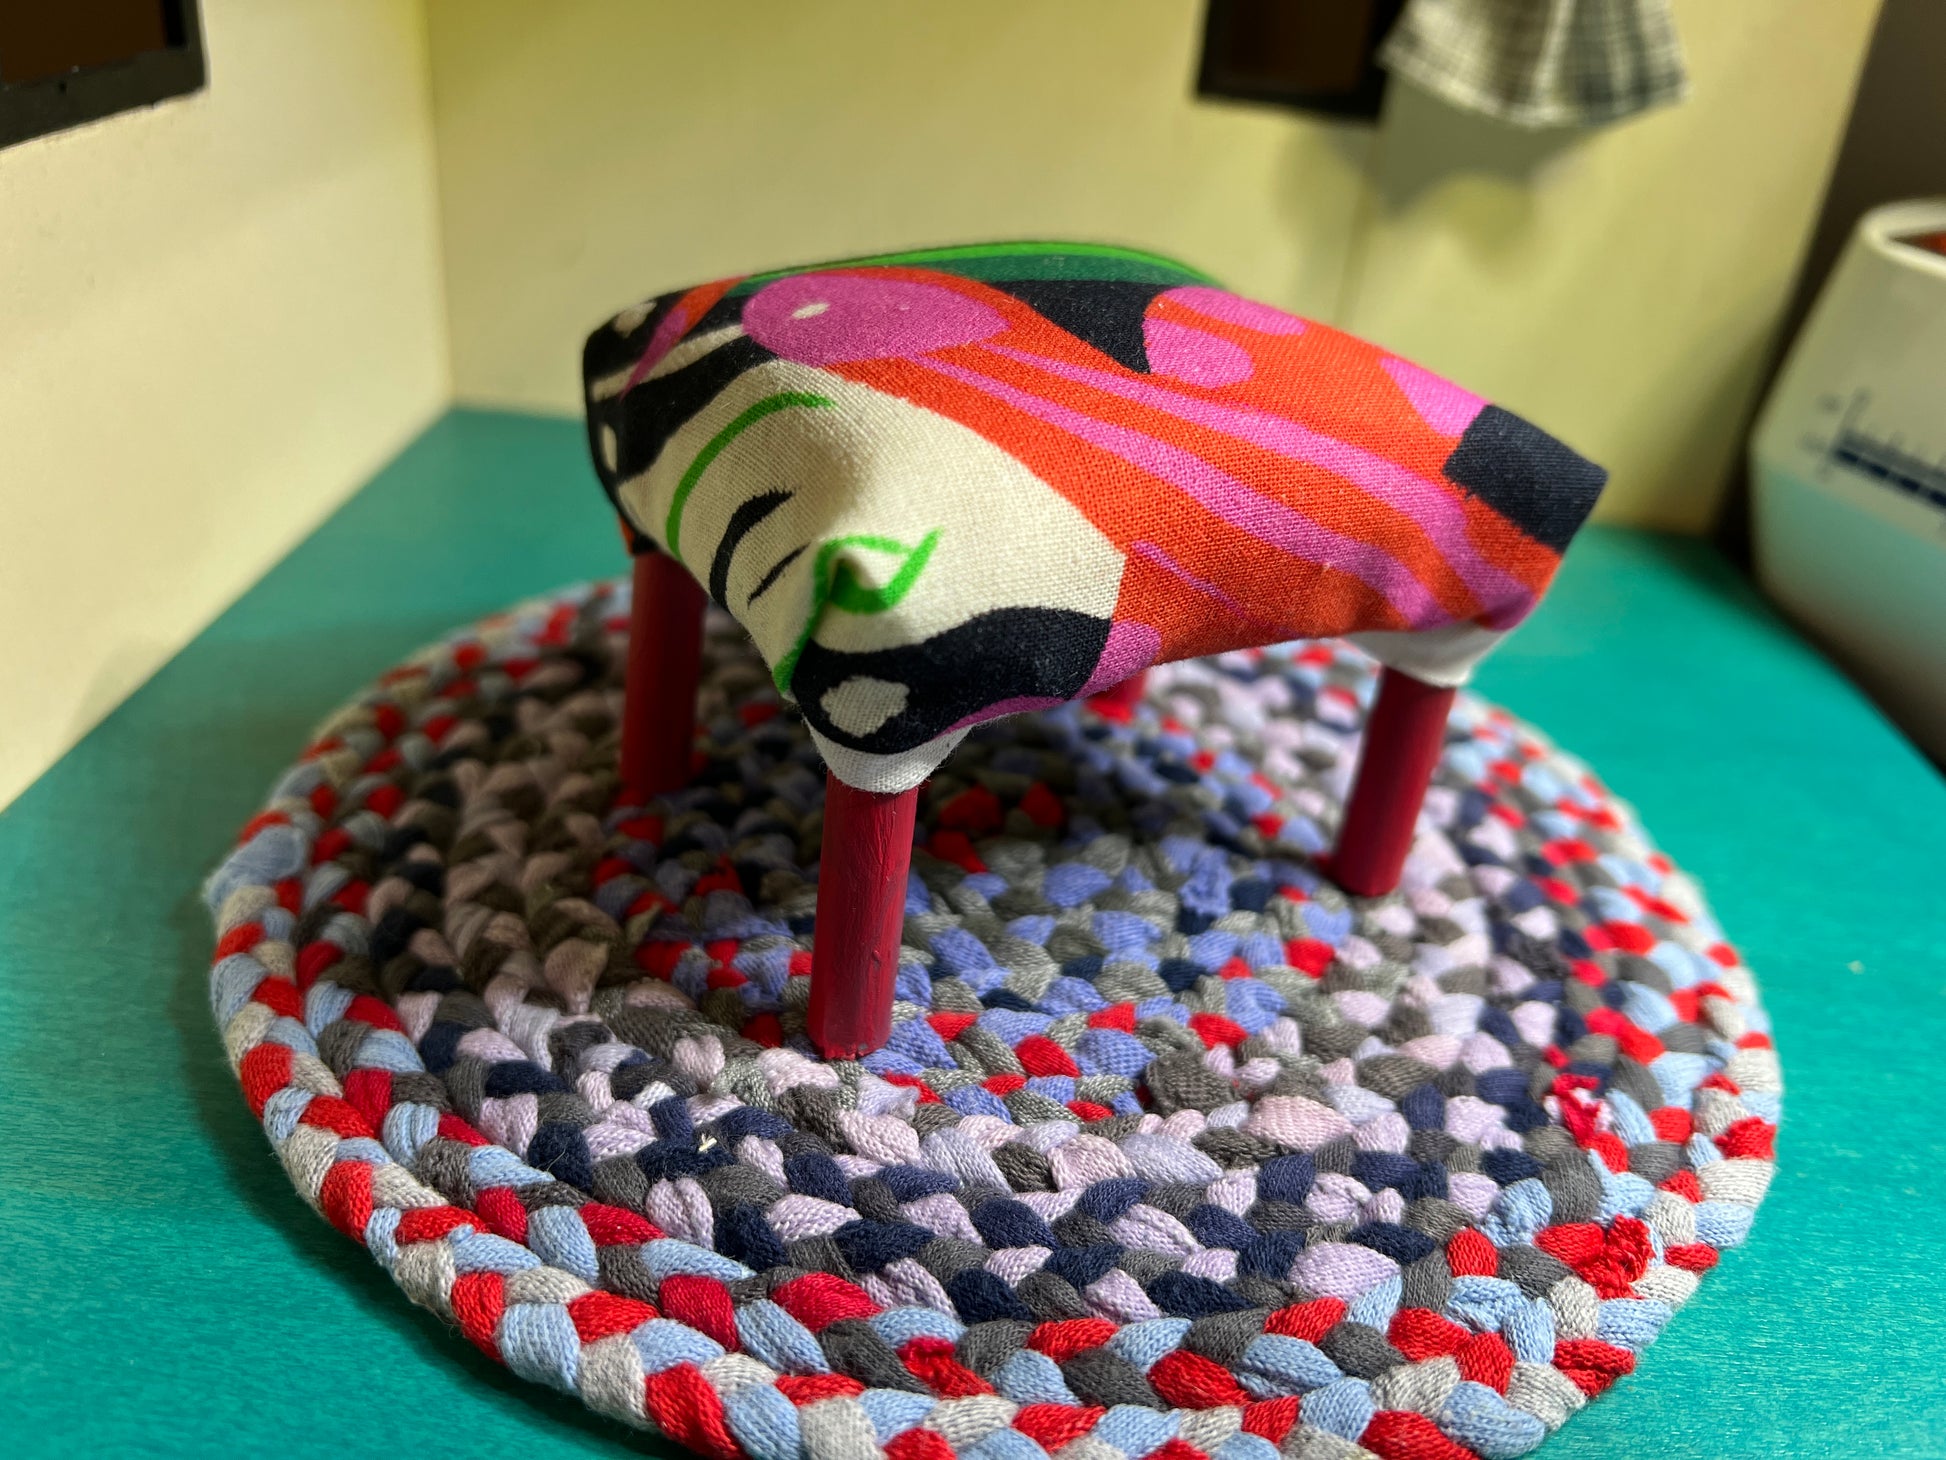 barbie ottoman in snake and leaves fabric, on top of a miniature rug for styling